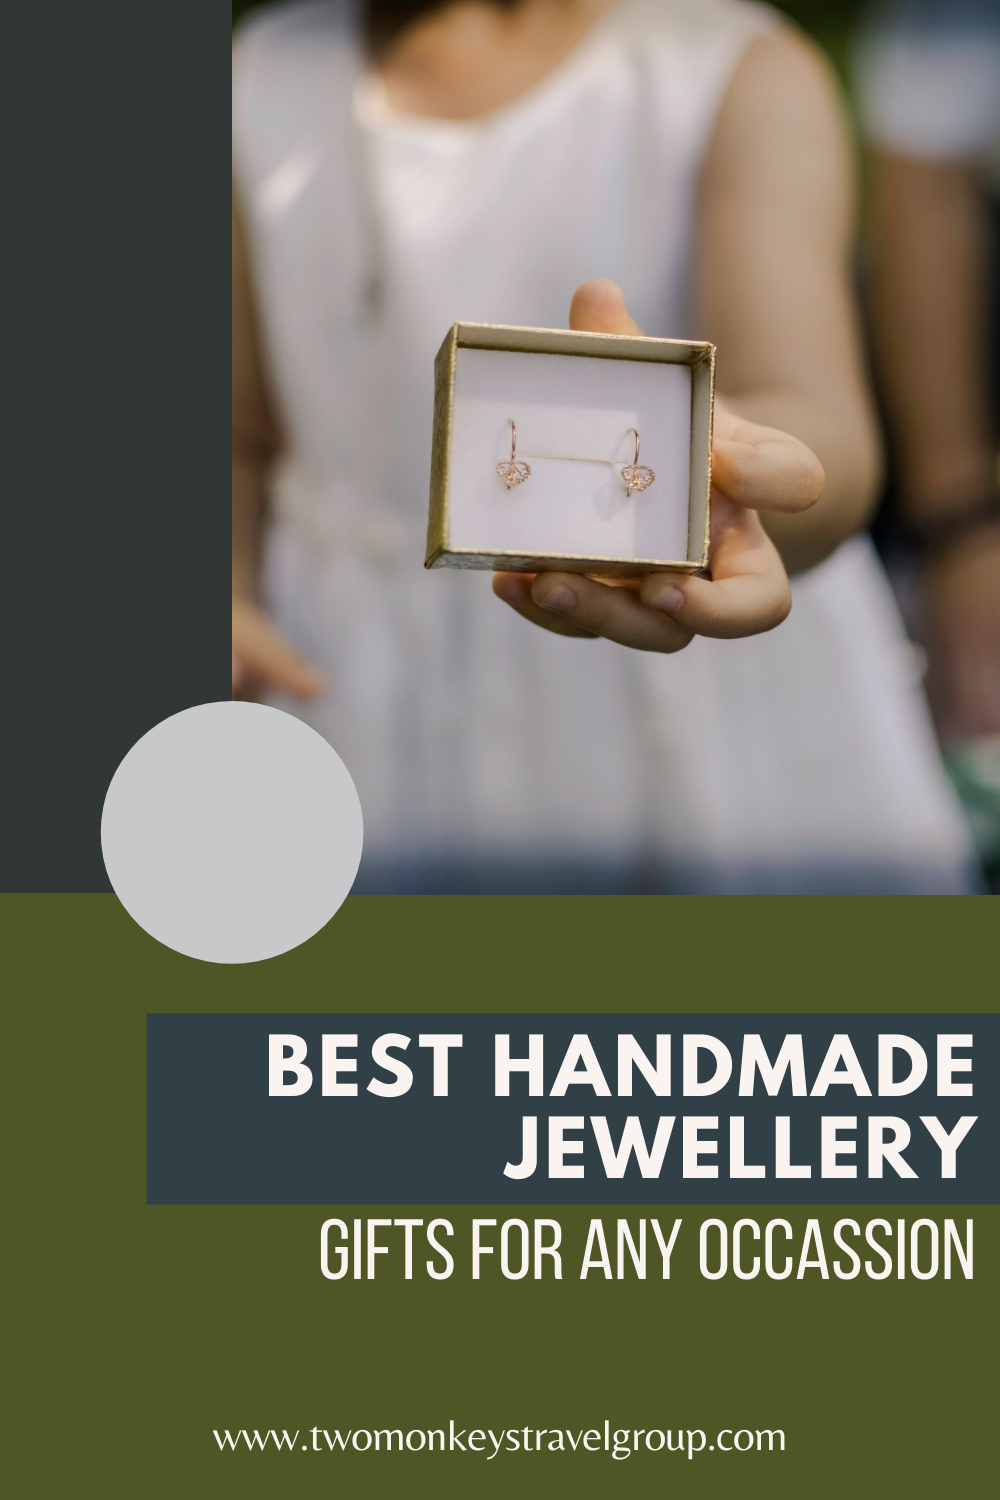 20 Best Handmade Jewellery Gifts for any Occassion